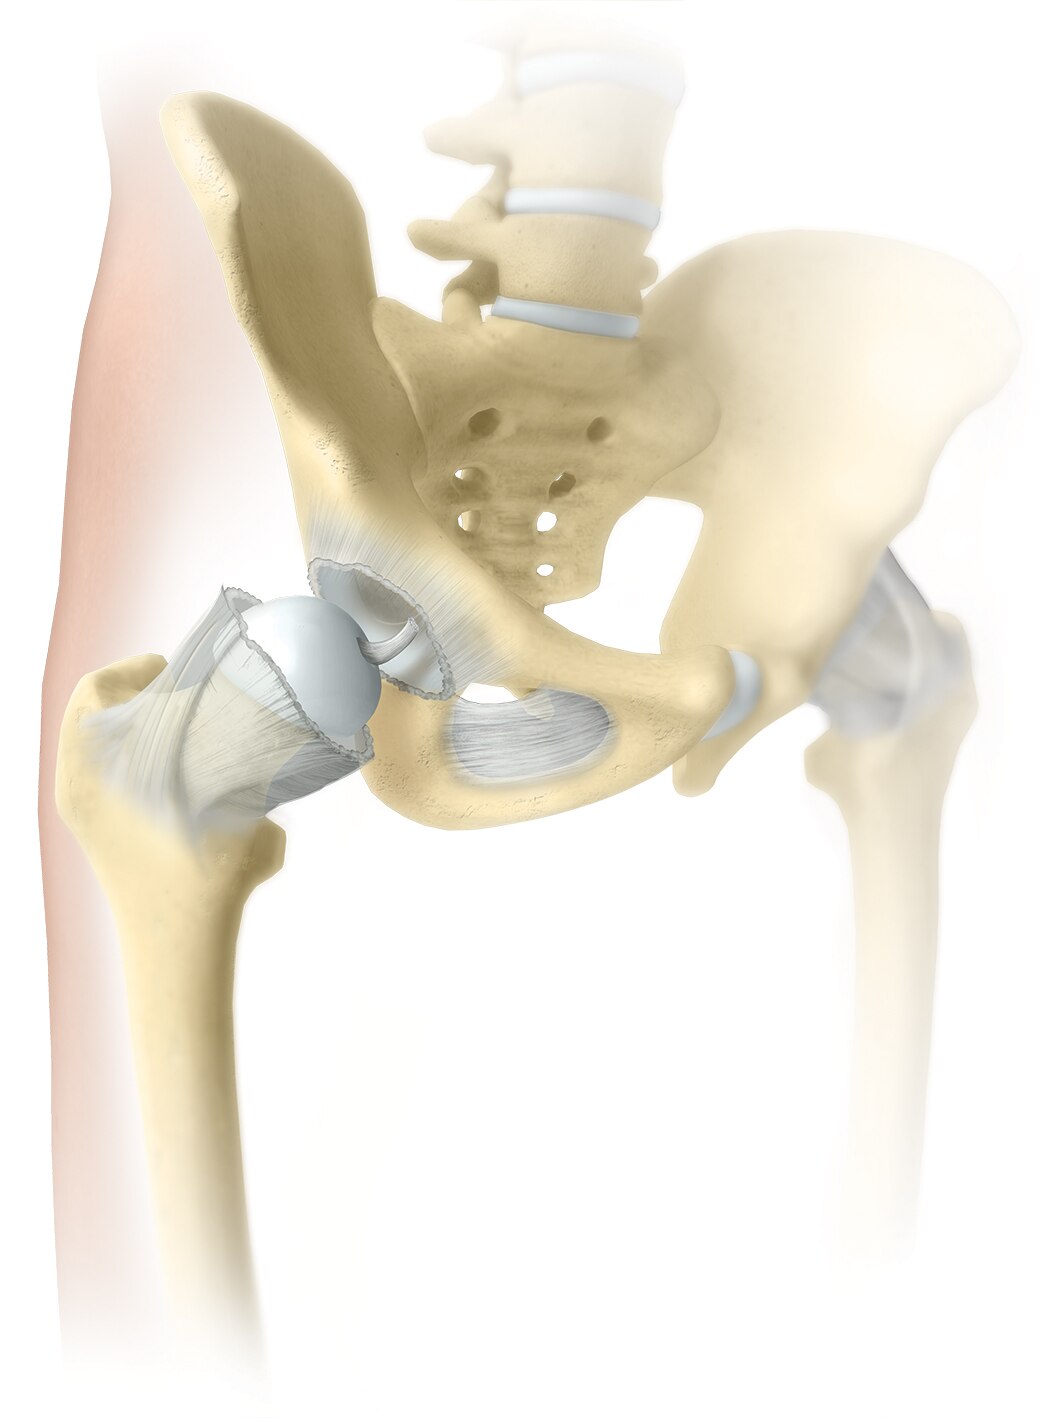 Hip-pain-relief-surgical-treatment-options-inline-image-healthy-hip